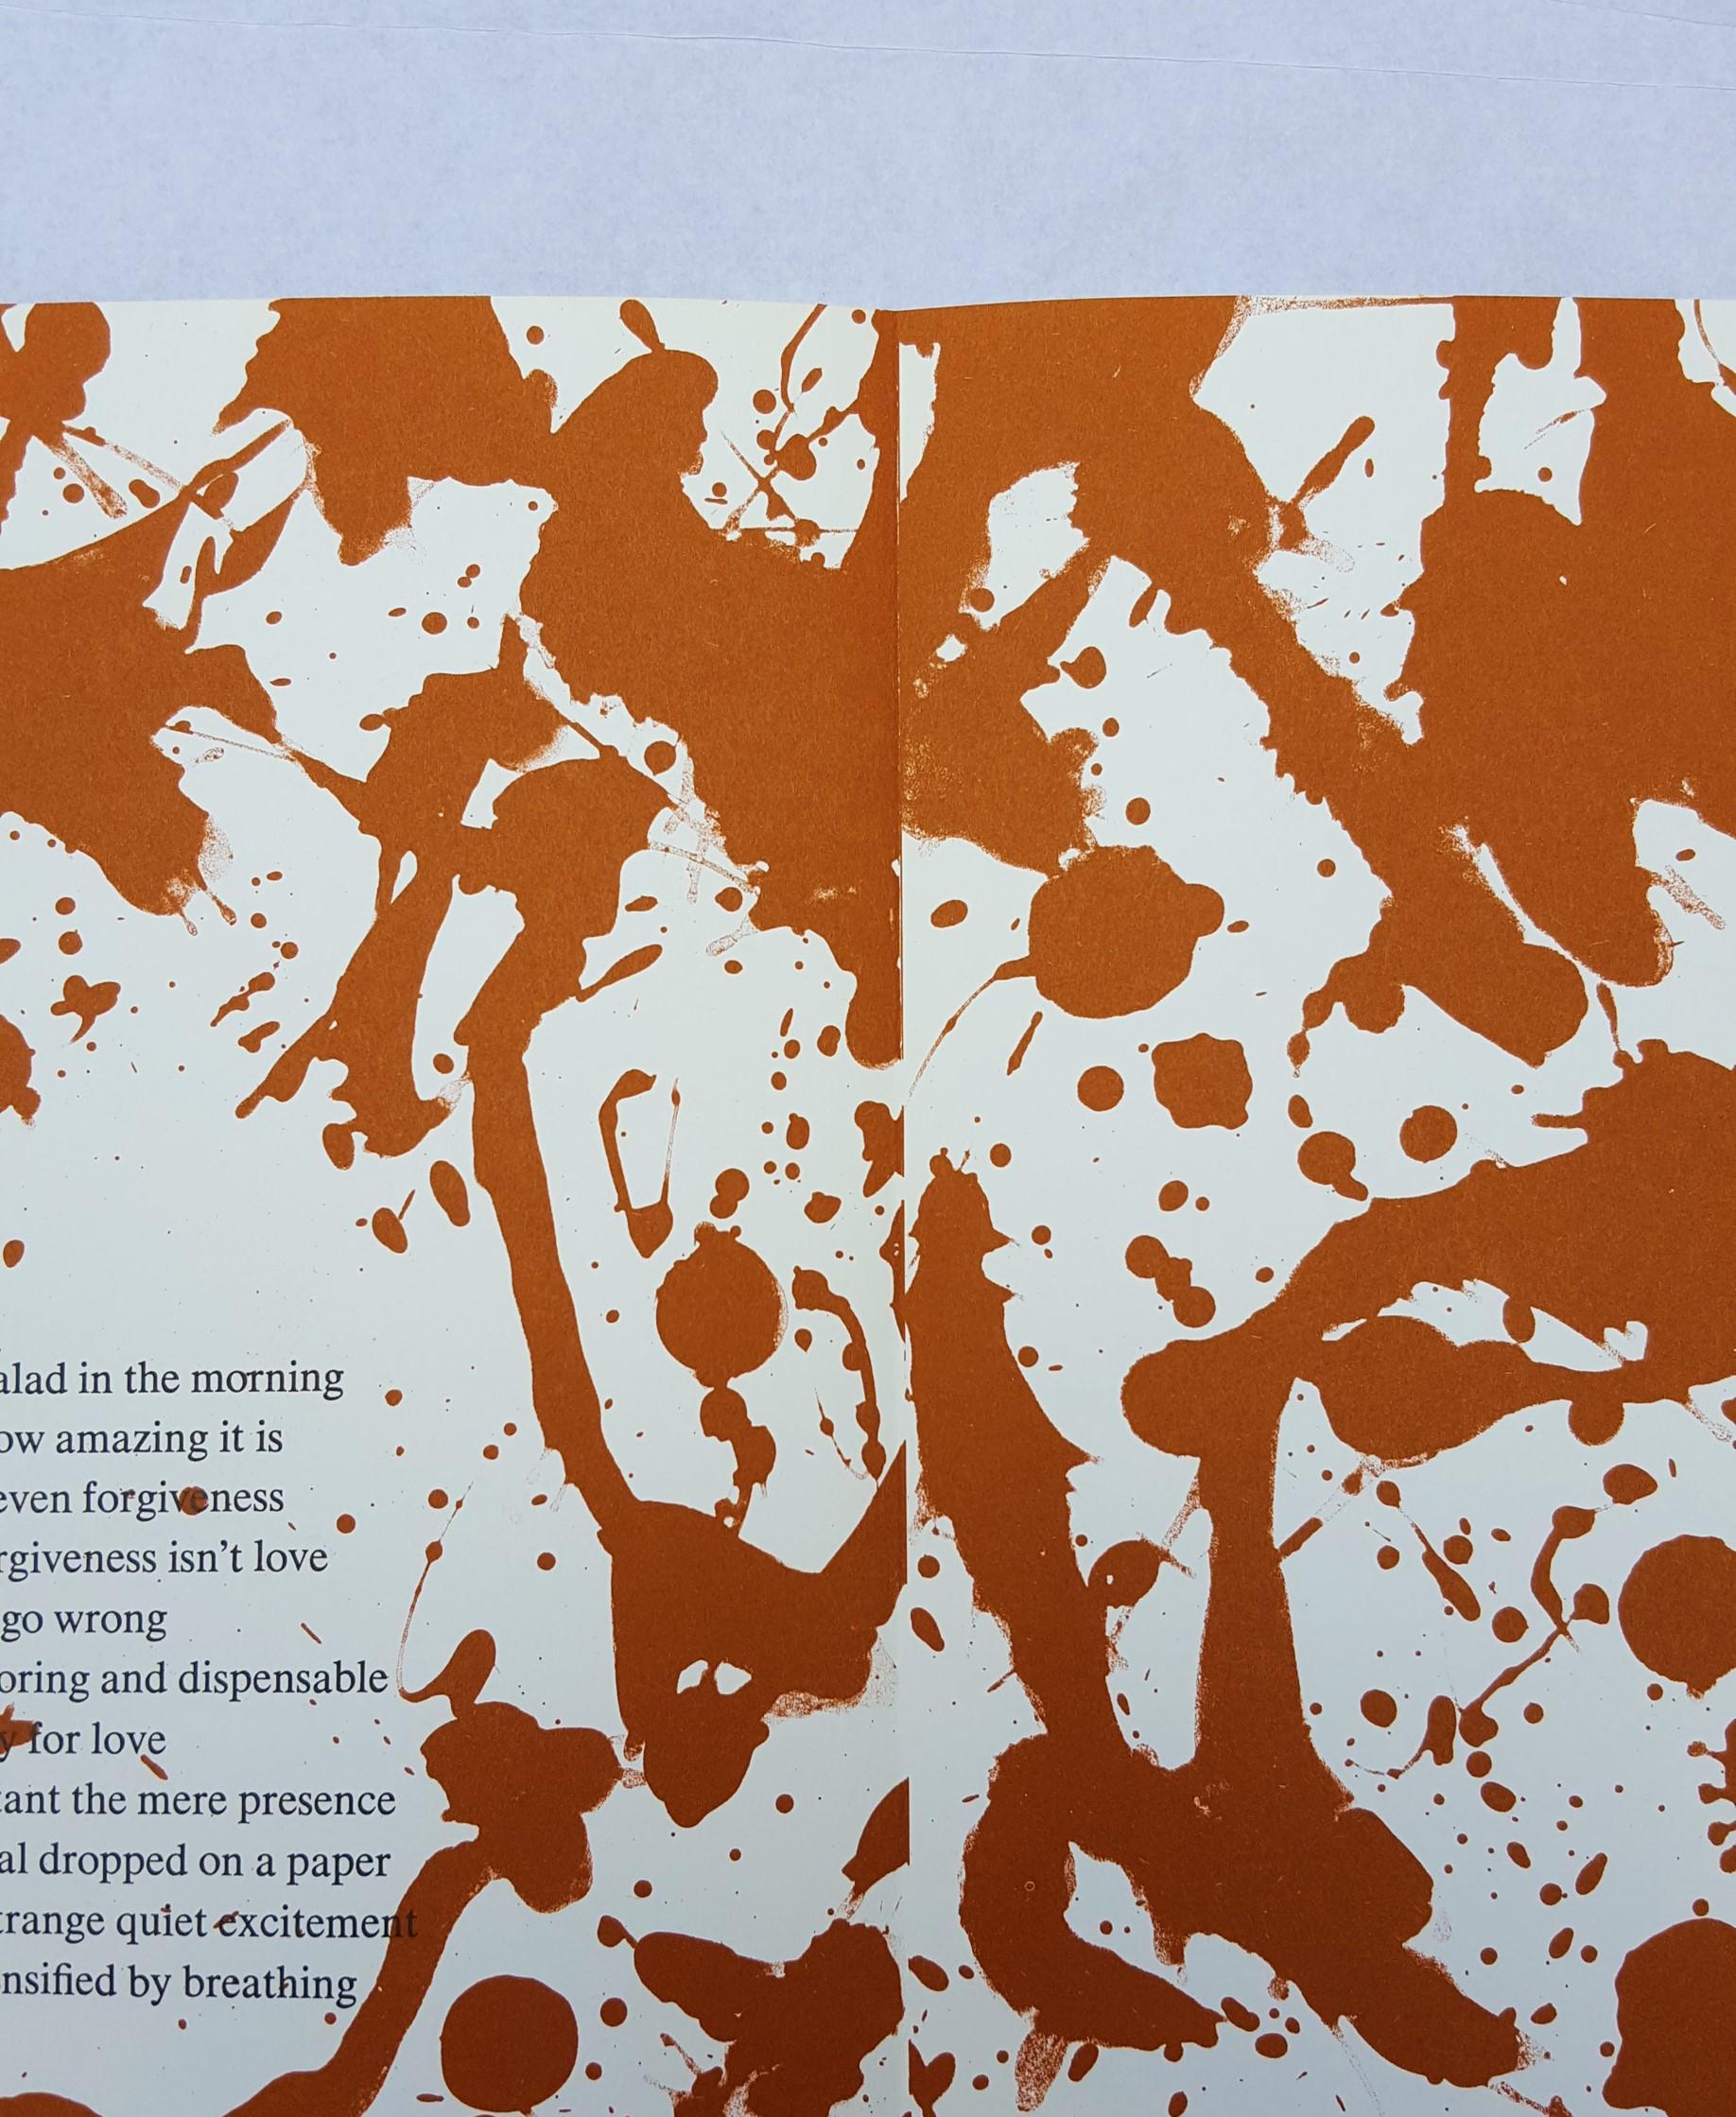 Poem /// Abstract Expressionist Female Artist Post-War NY Modern Lithograph MoMA - Brown Abstract Print by Lee Krasner